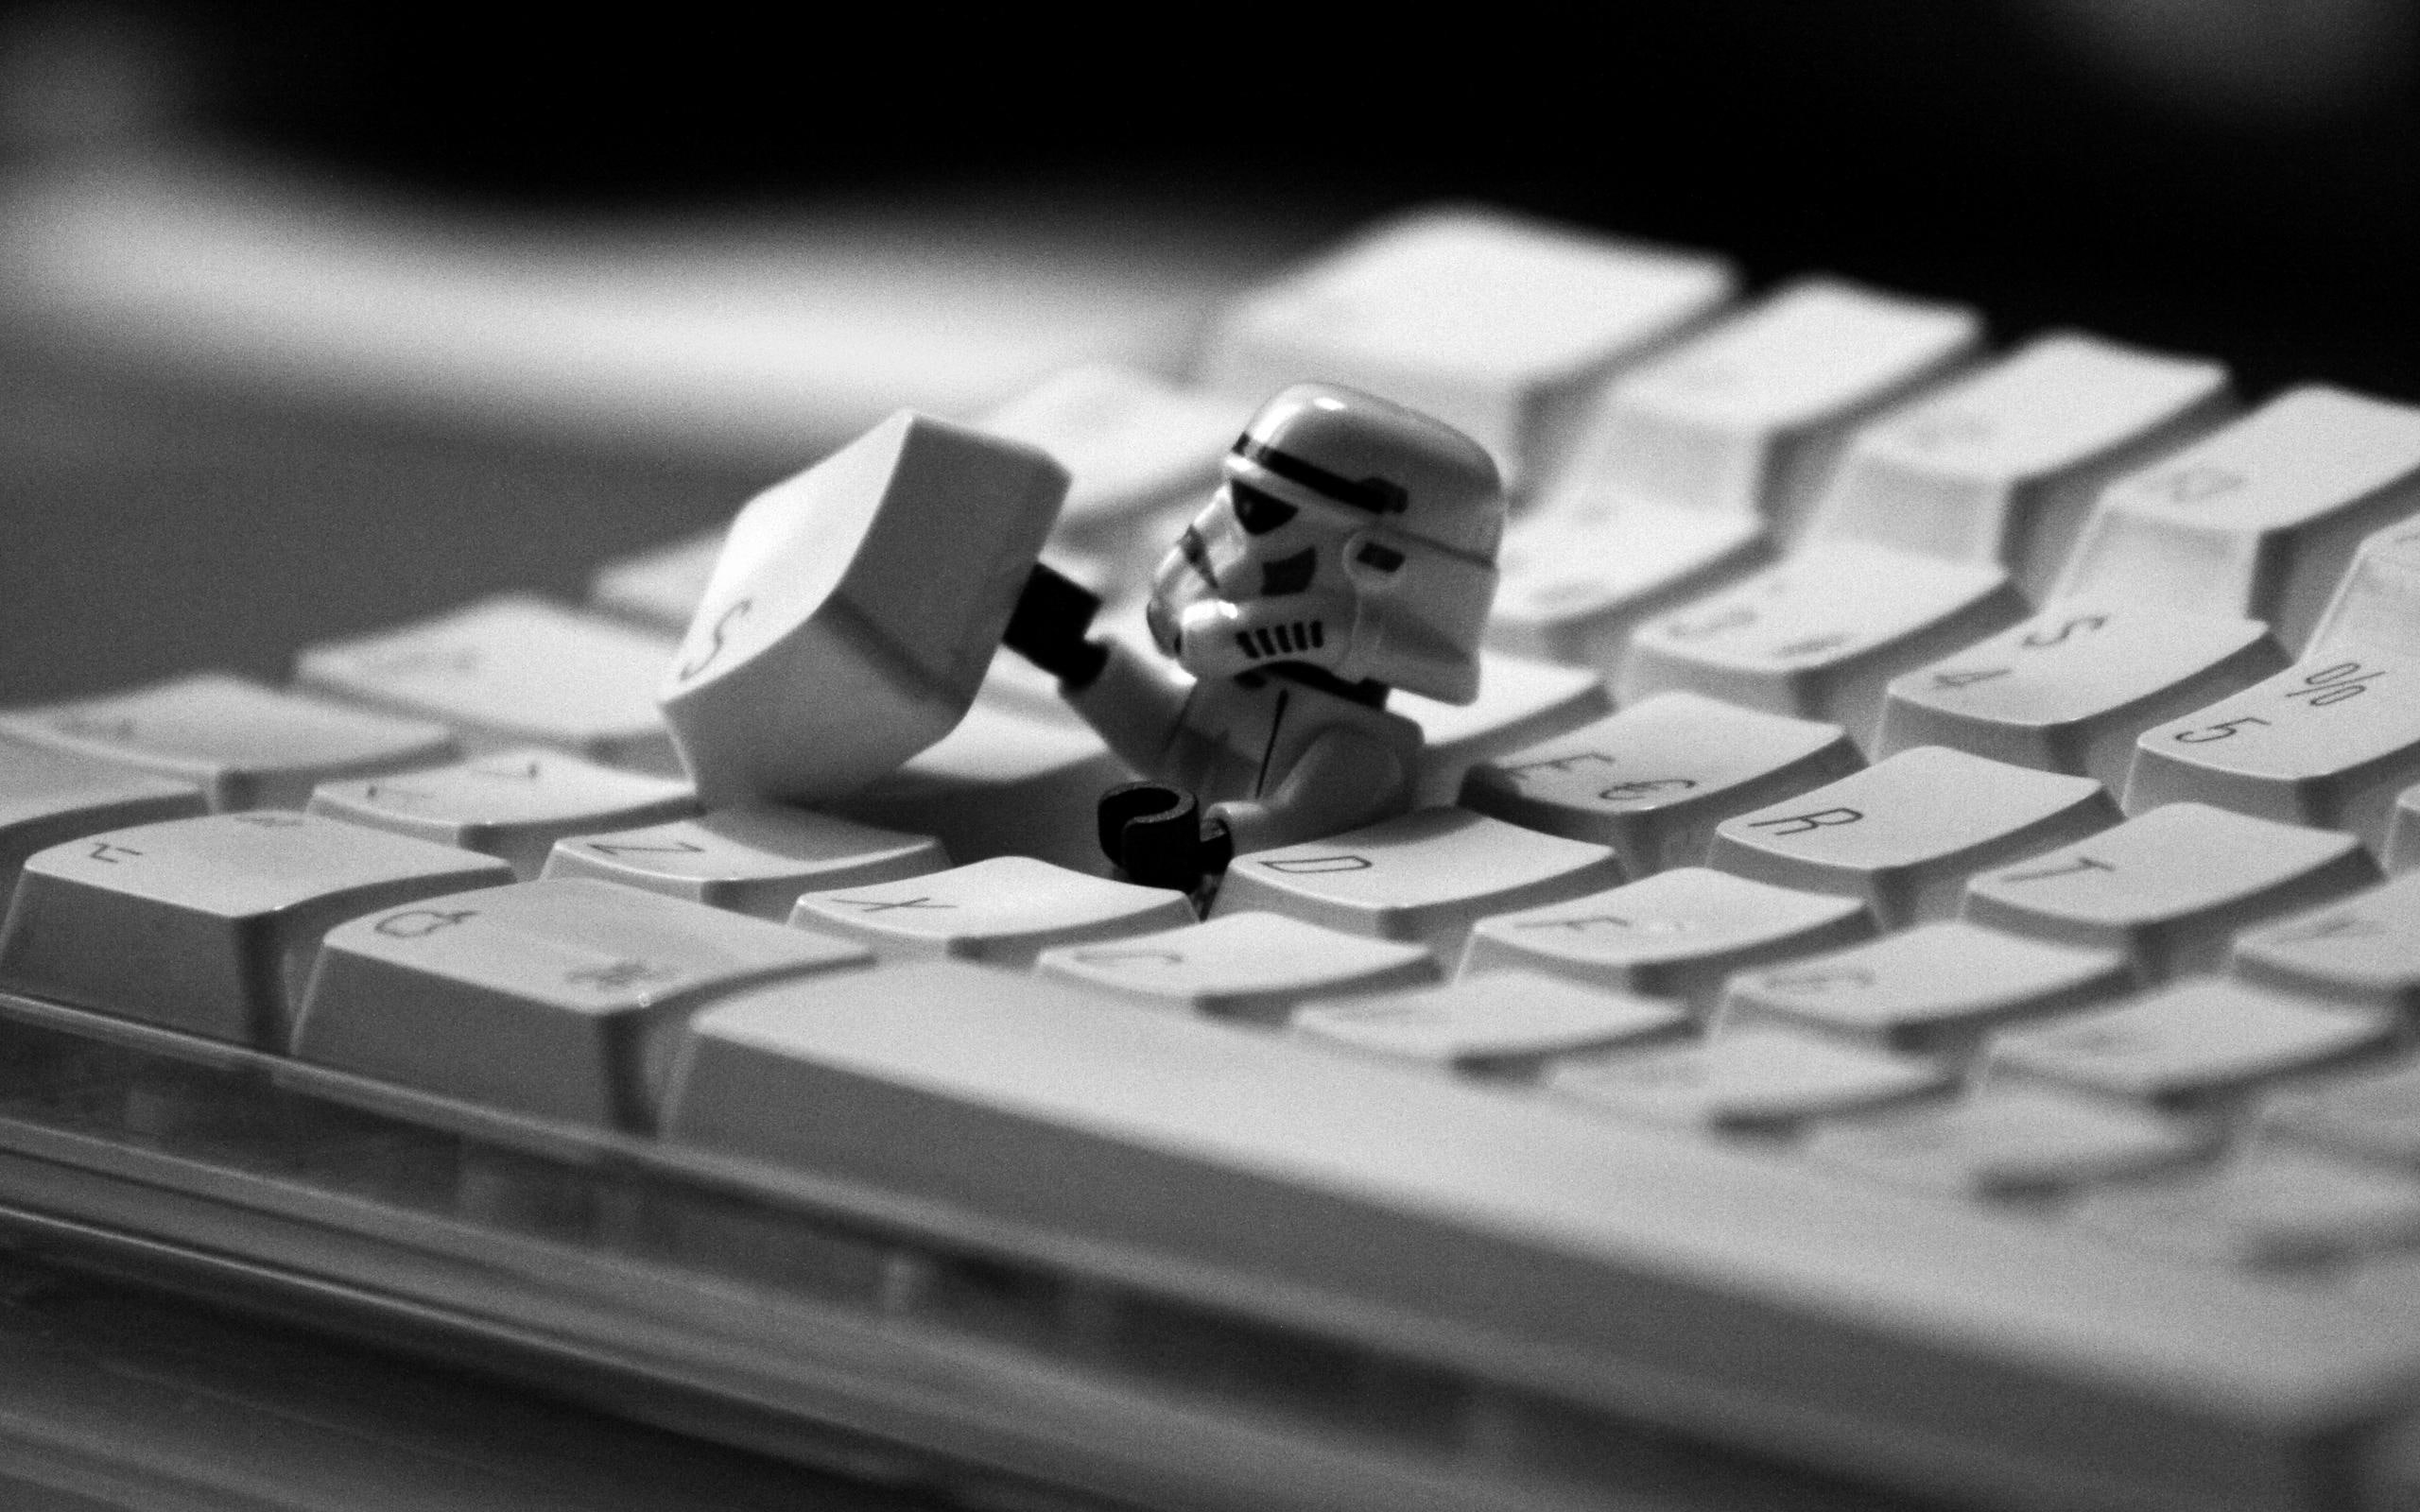 Clone Invasion, star wars, lego, keyboard, 3d and abstract